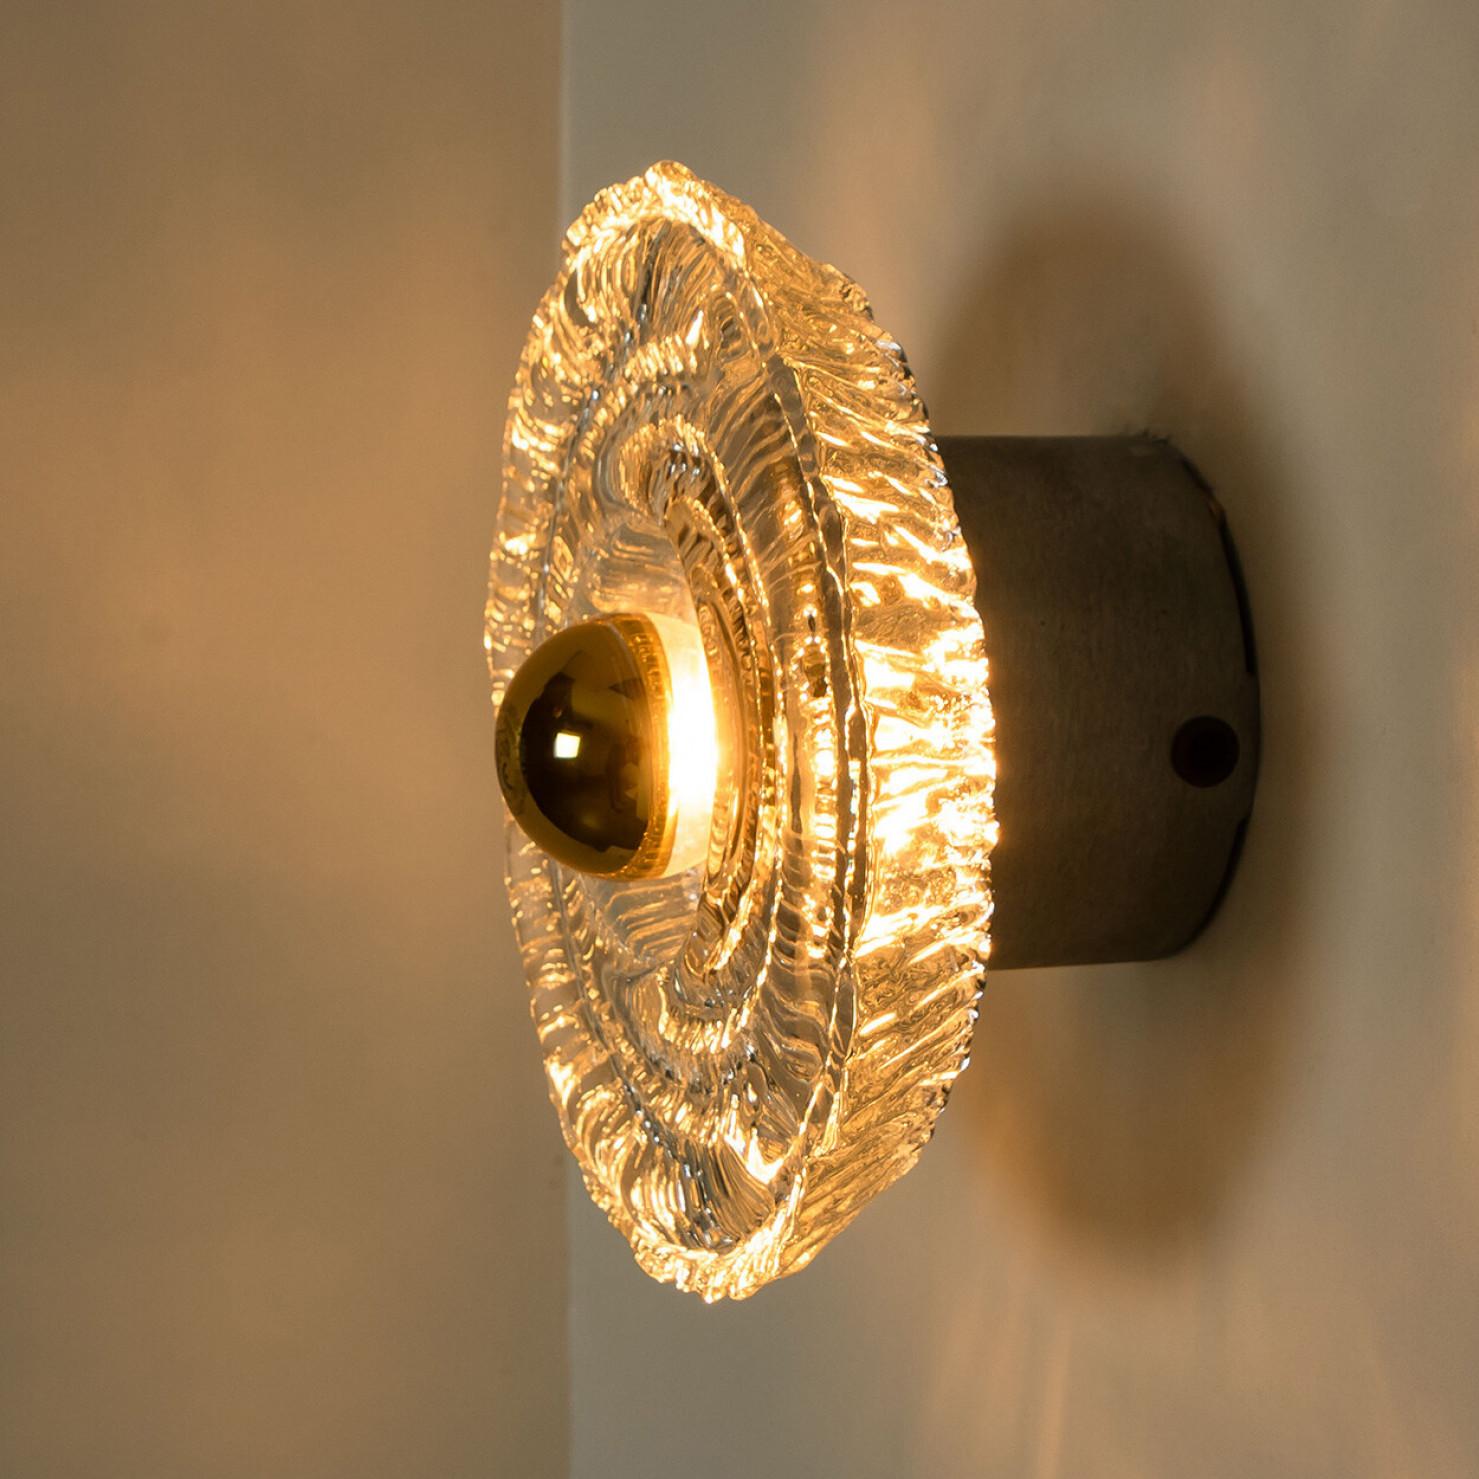 1 of 4 Round Gold Glass Wall Lights/Flush mounts by Peill Putzler, Germany, 1970 For Sale 6